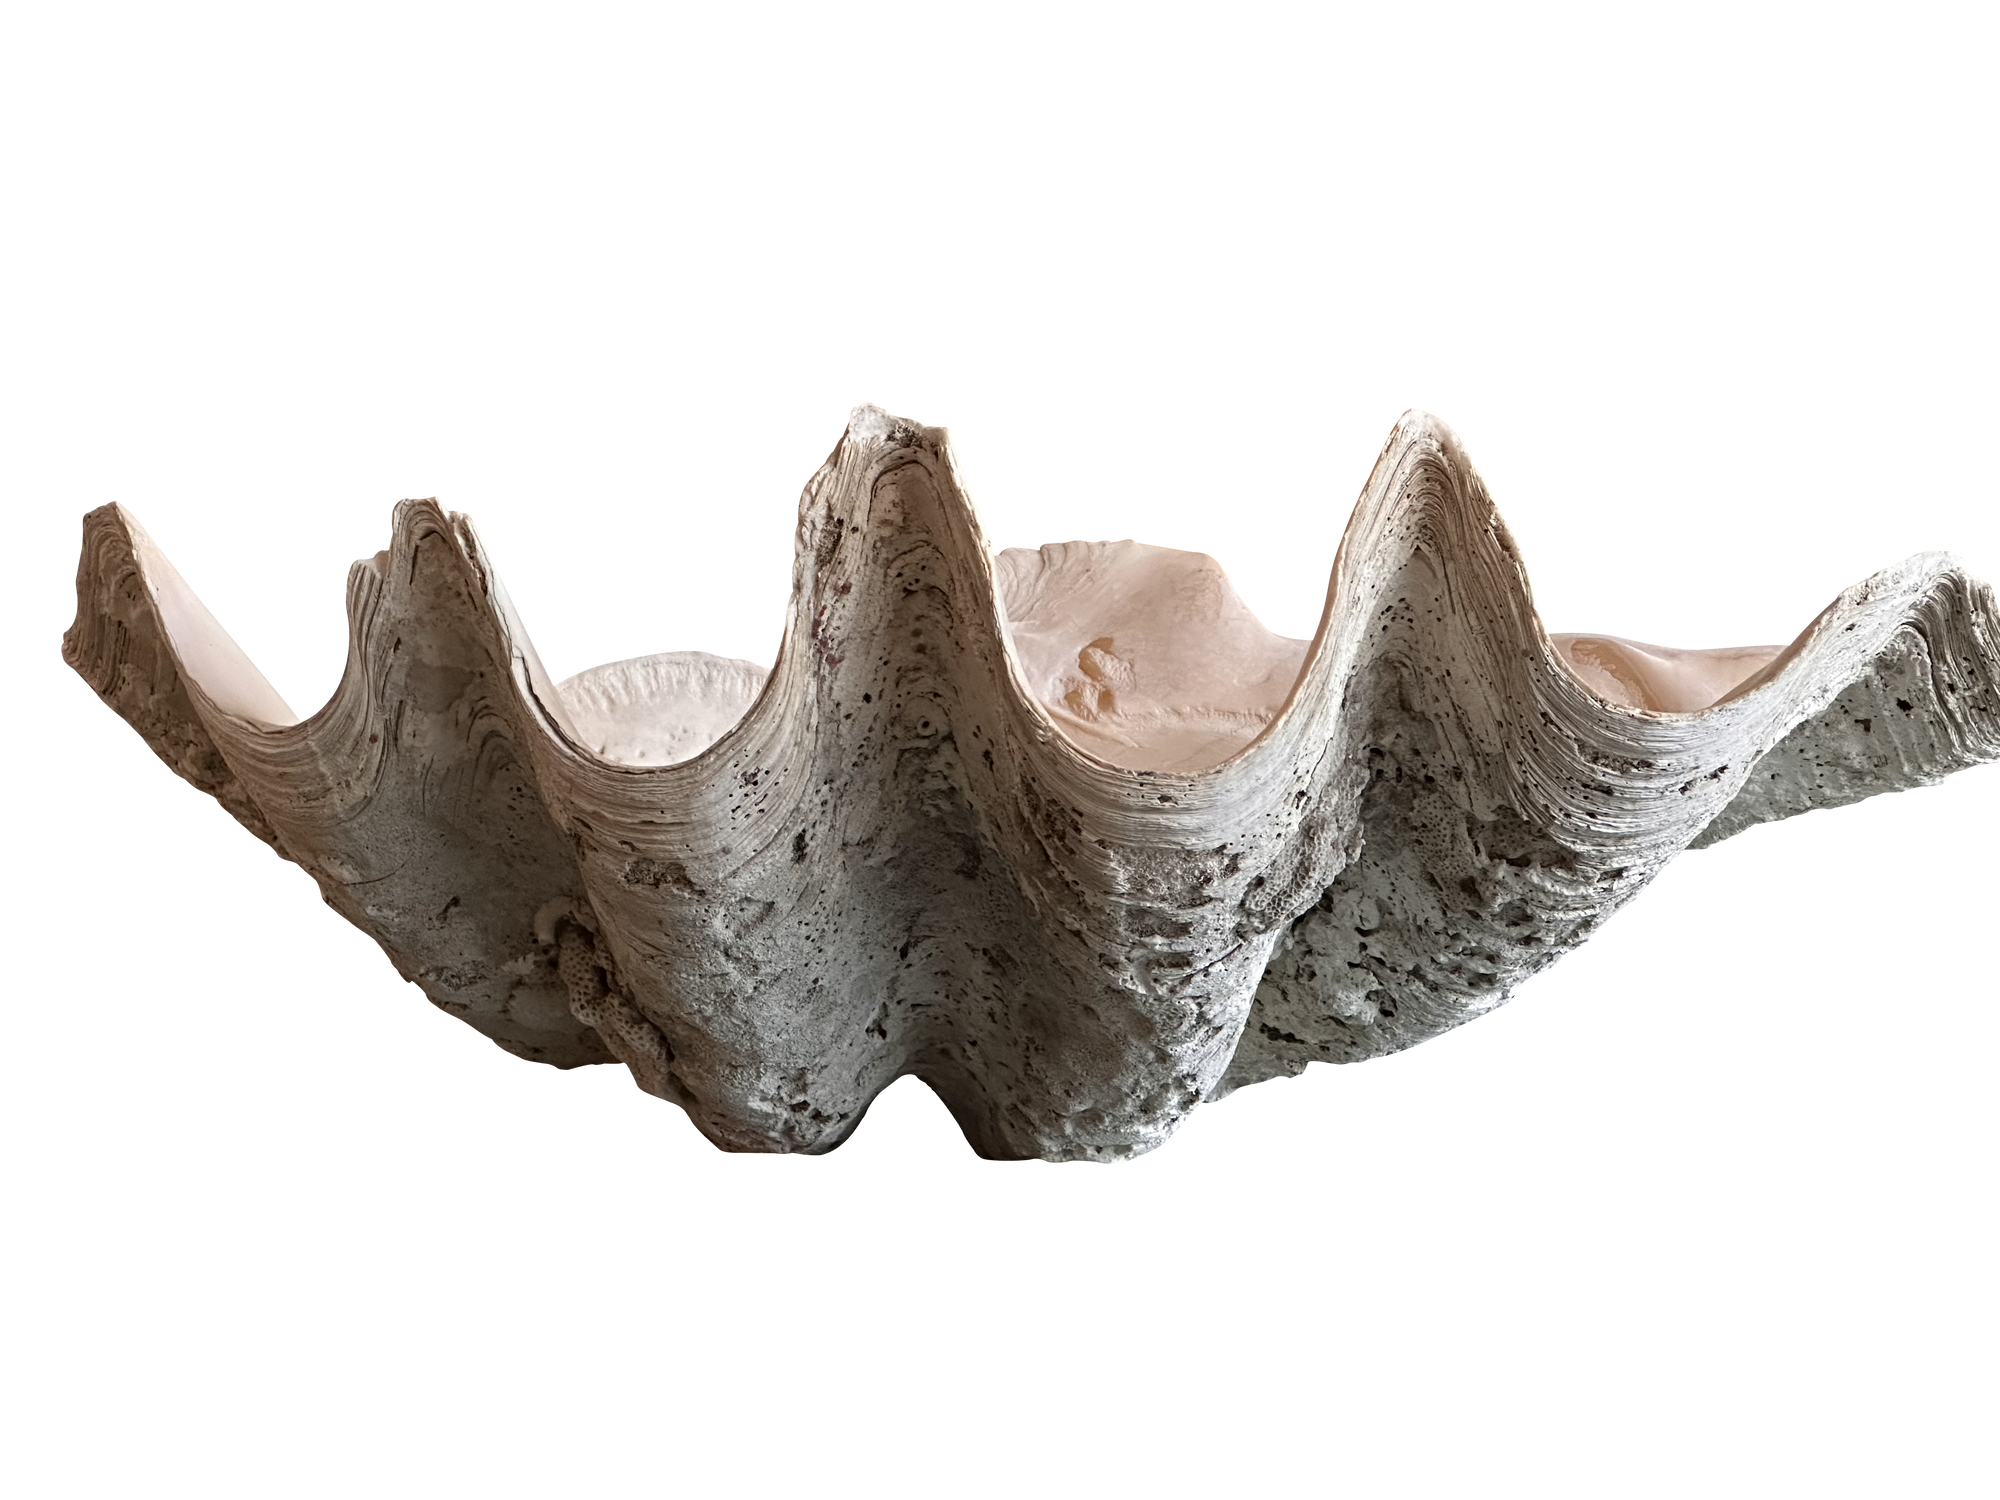 Large Antique 'Tridacna Gigas' 'Giant Clam' Shell, Pacific Ocean